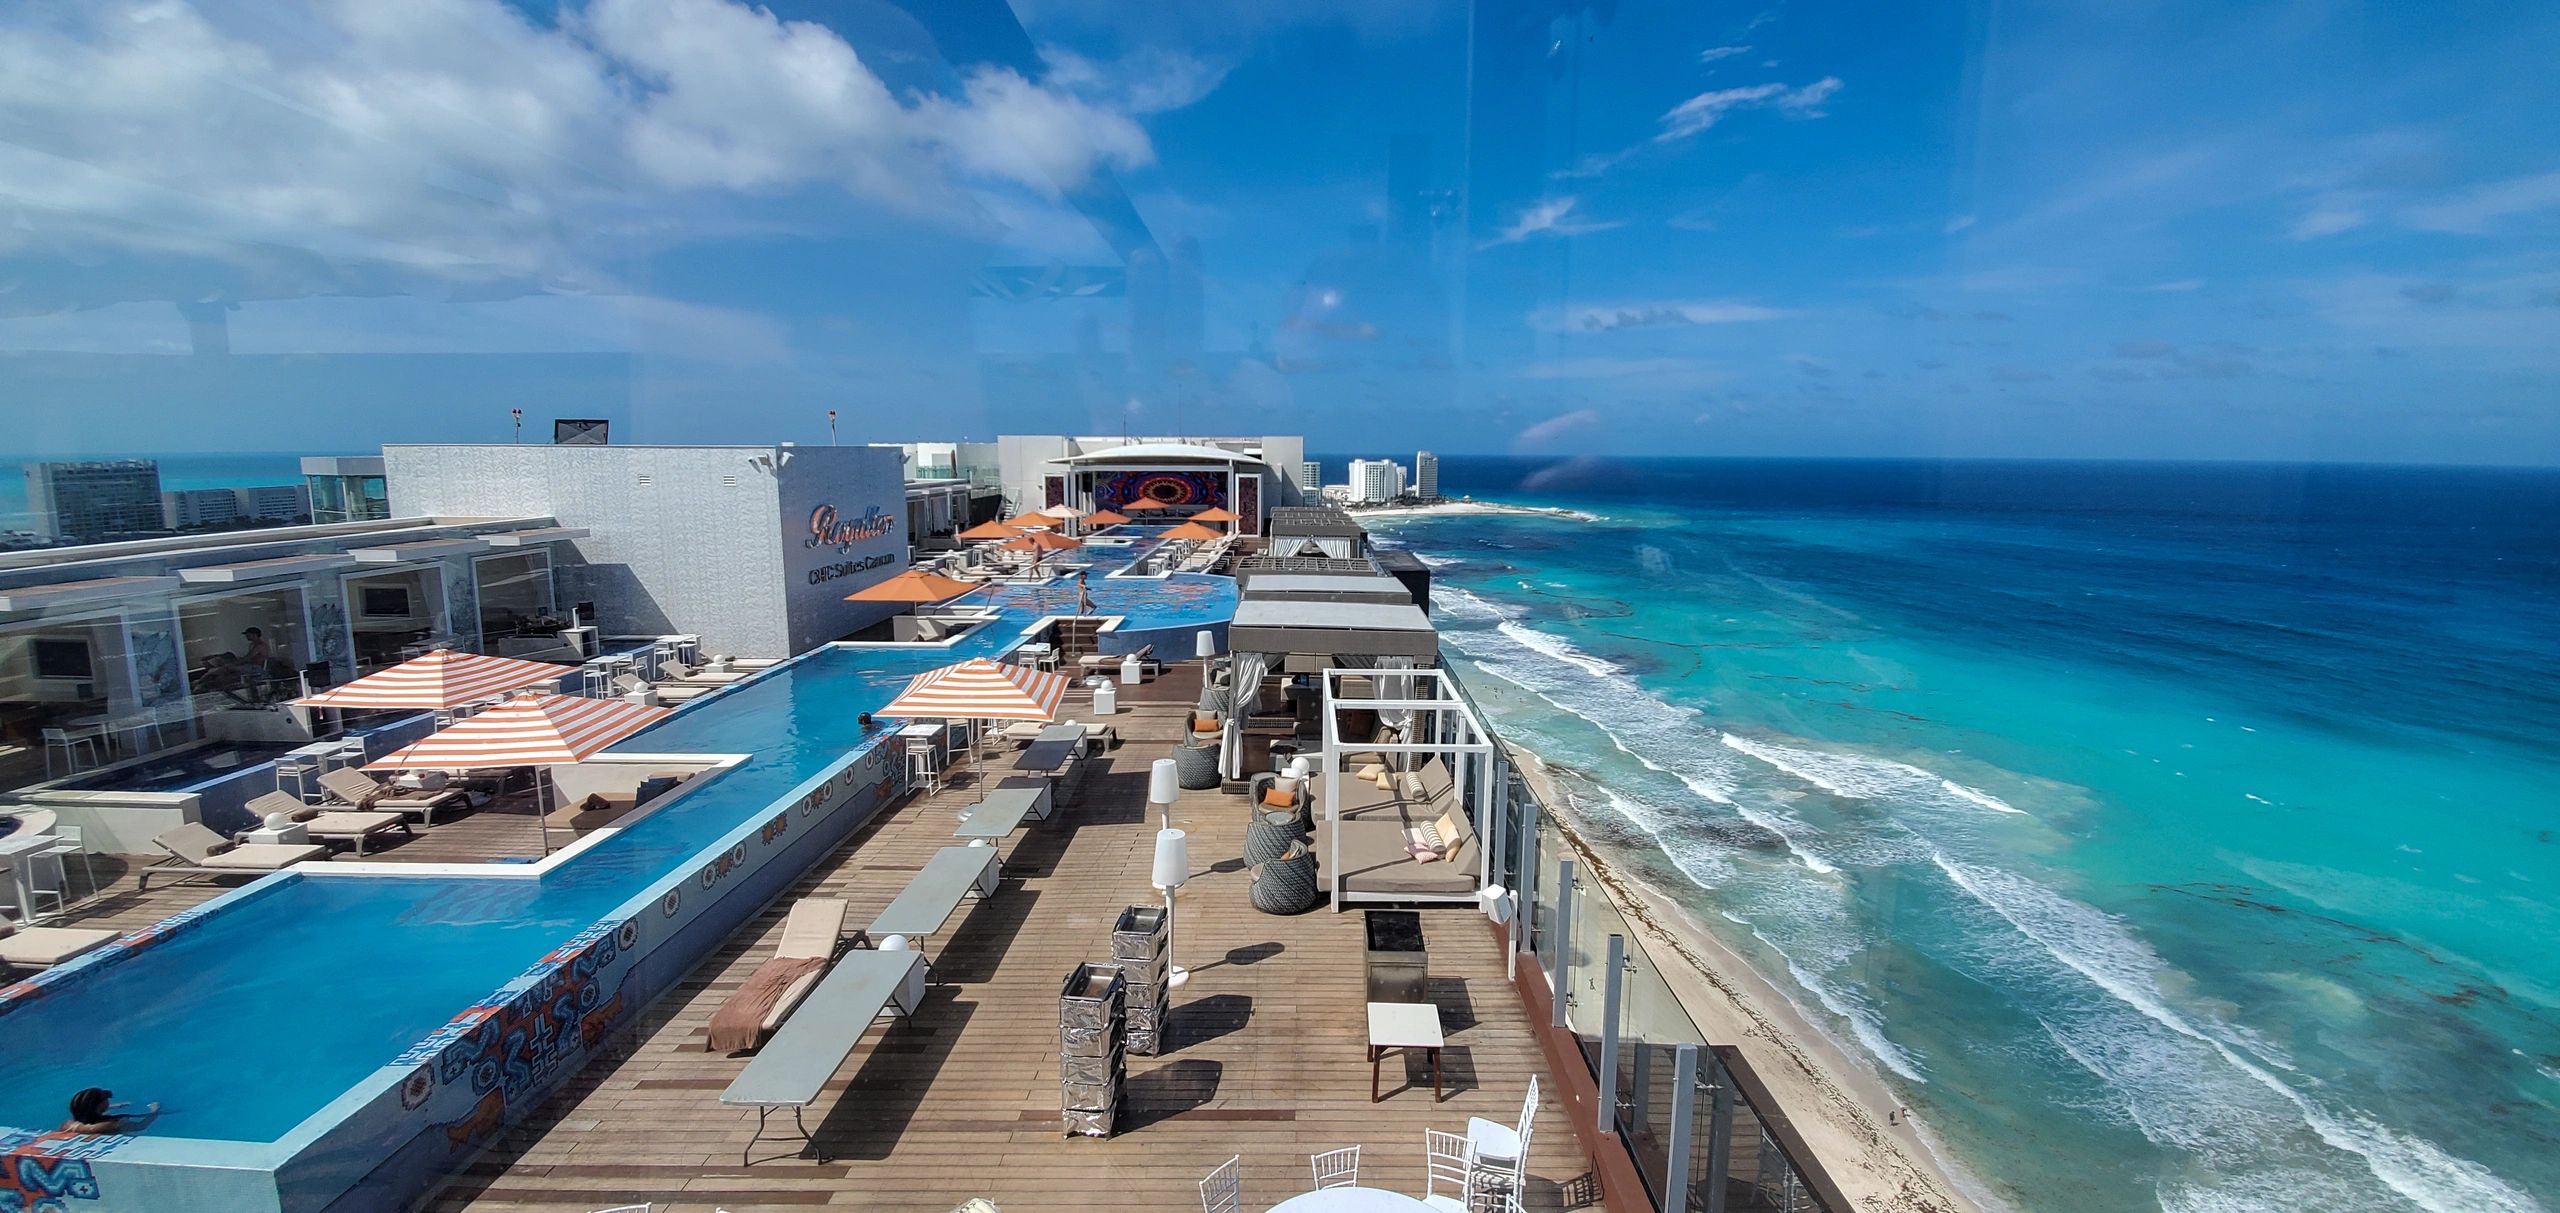 ROOFTOP POOL AT THE ROYALTON CHIC SUITES CANCUN SITTING NEXT TO THE CARIBBEAN OCEAN